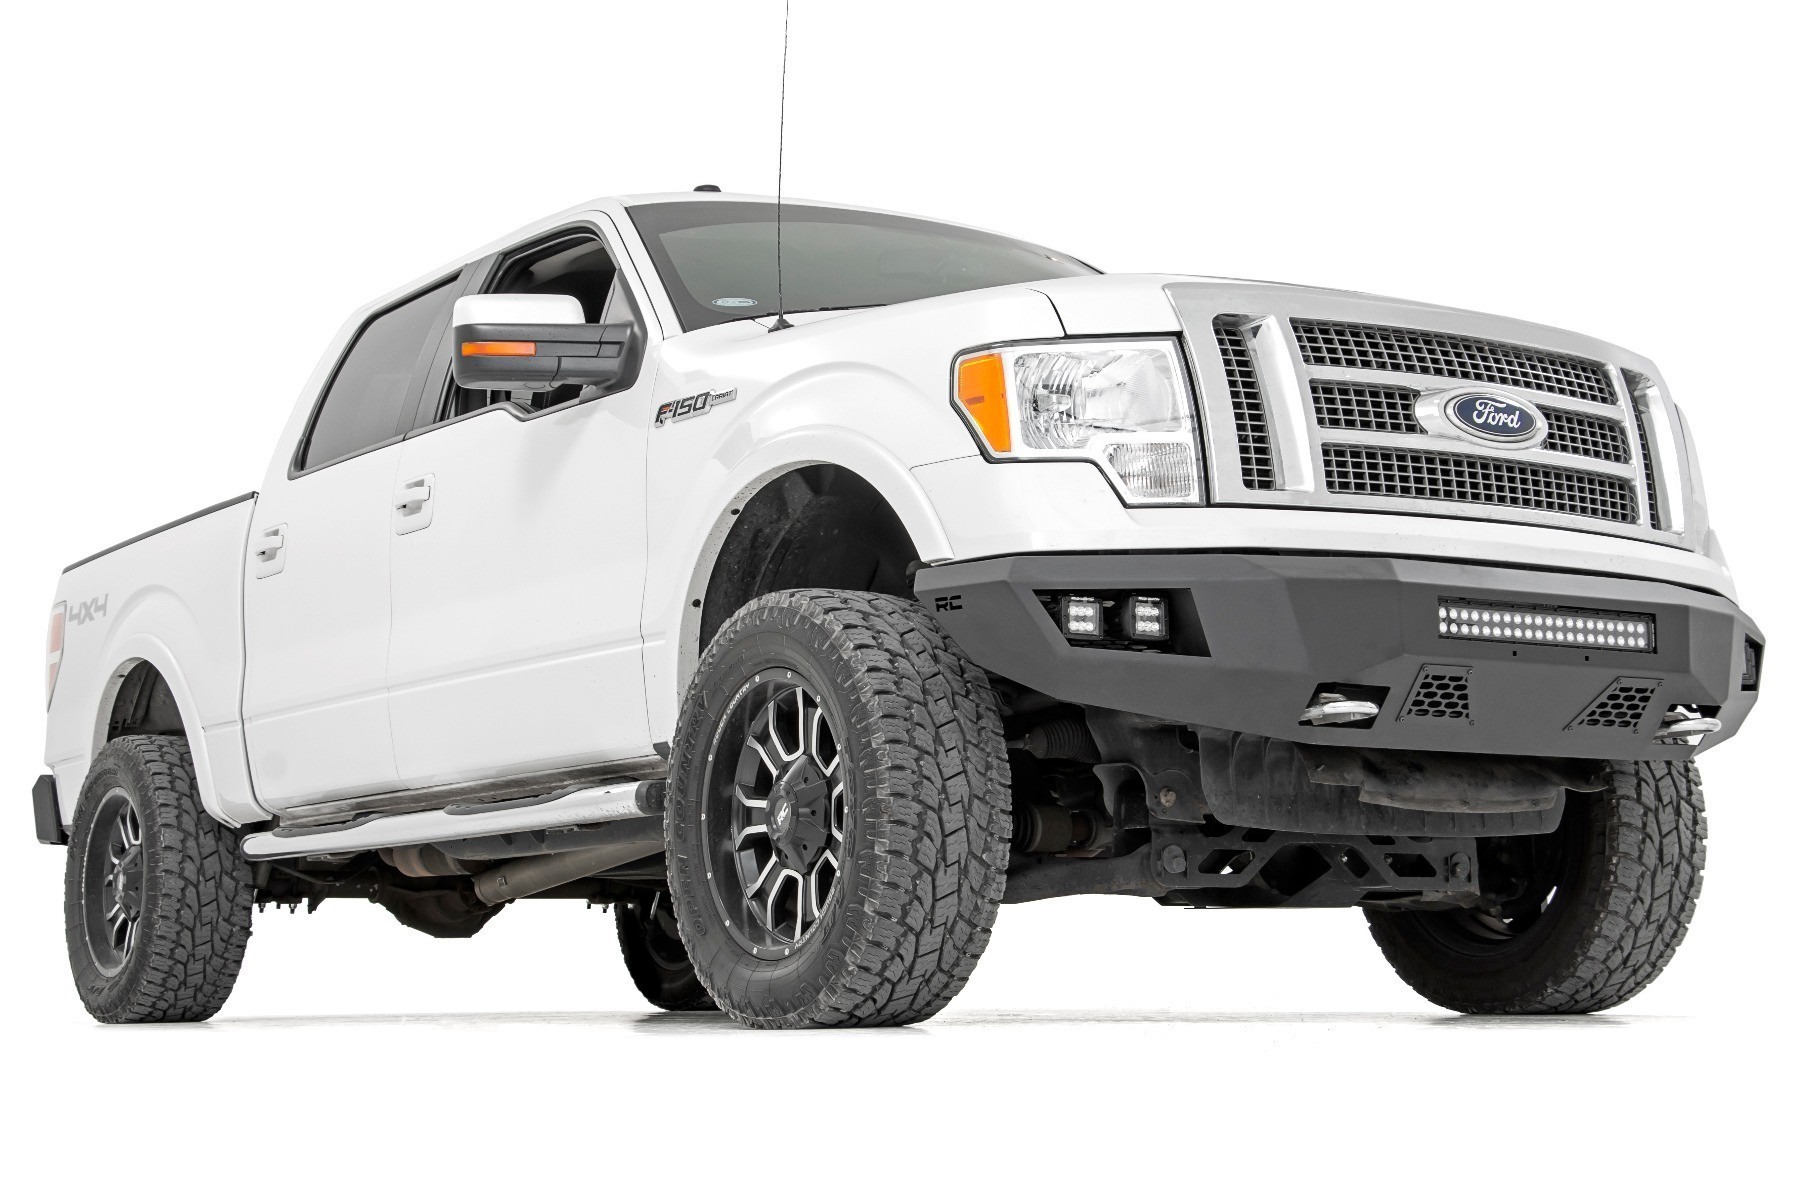 Front Bumper | Ford F-150 2WD/4WD (2009-2014)